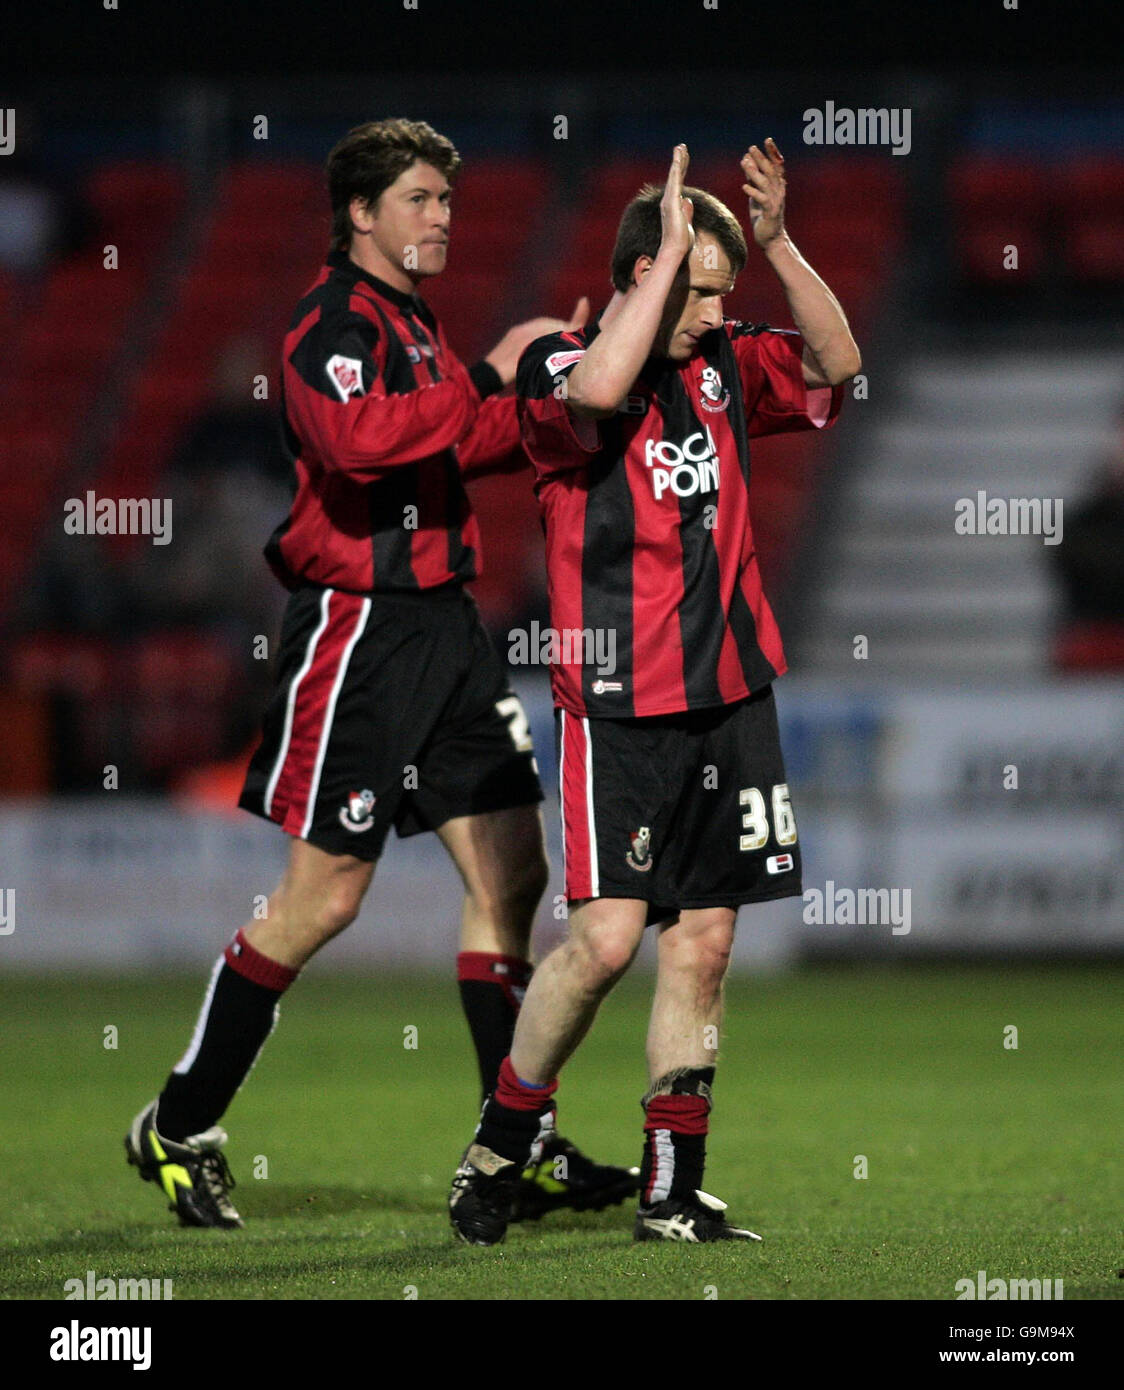 Steve Claridge is subbed during the League One match between Bournemouth and Port Vale during the League One match at the Dean Court Ground, Bournemouth. Darren Anderton claps him off. Stock Photo